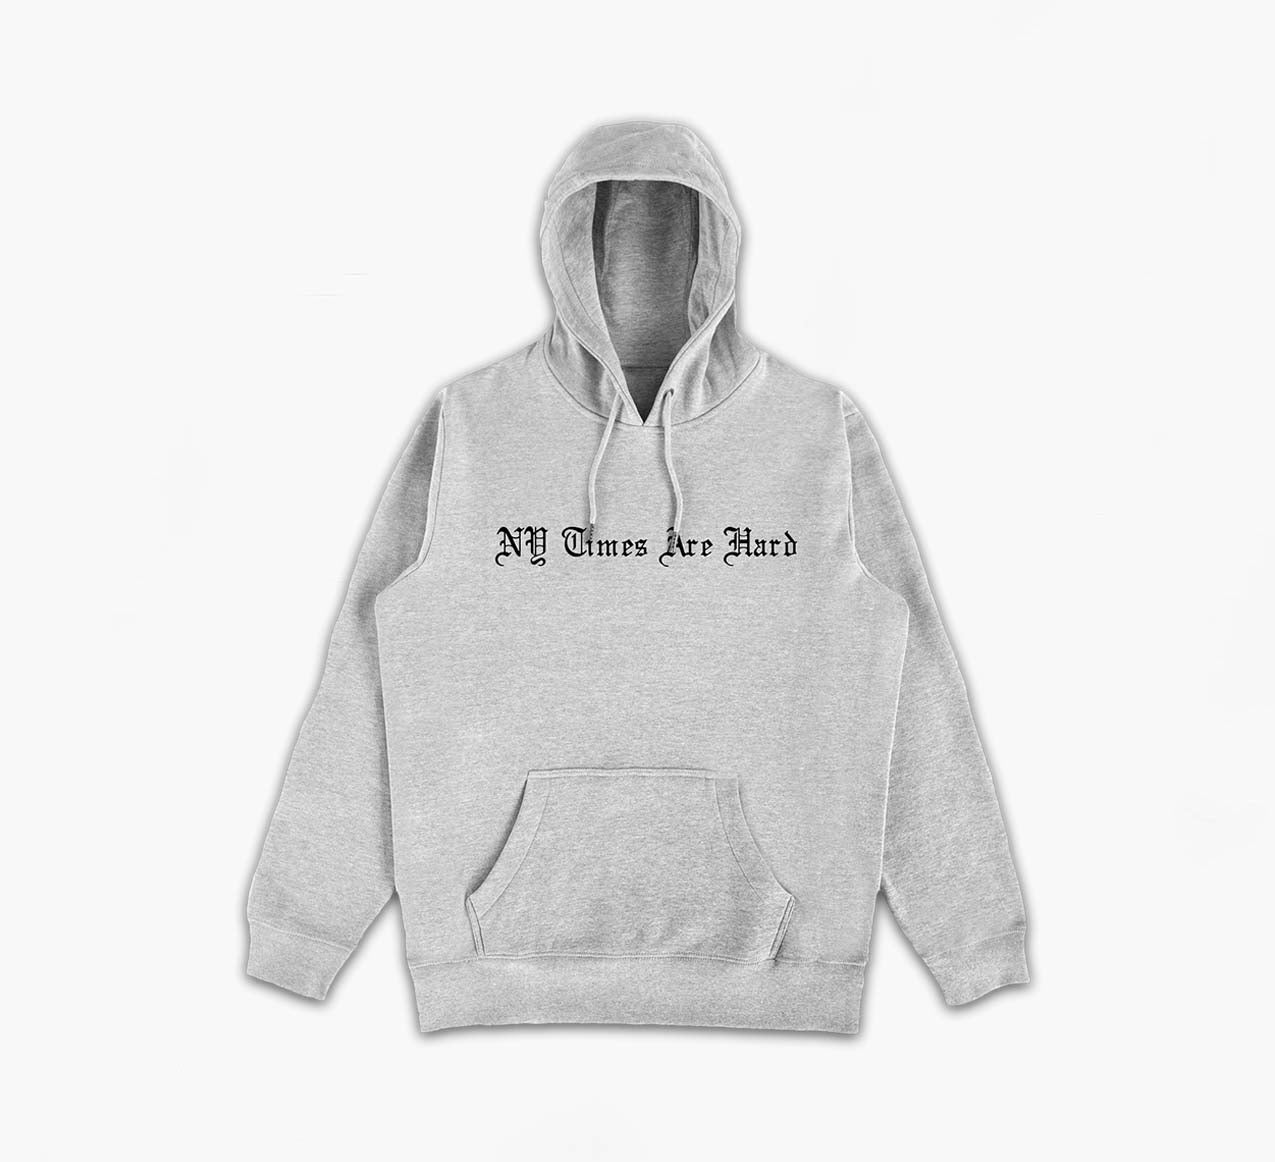 NY Times Are Hard Grey Hoodie